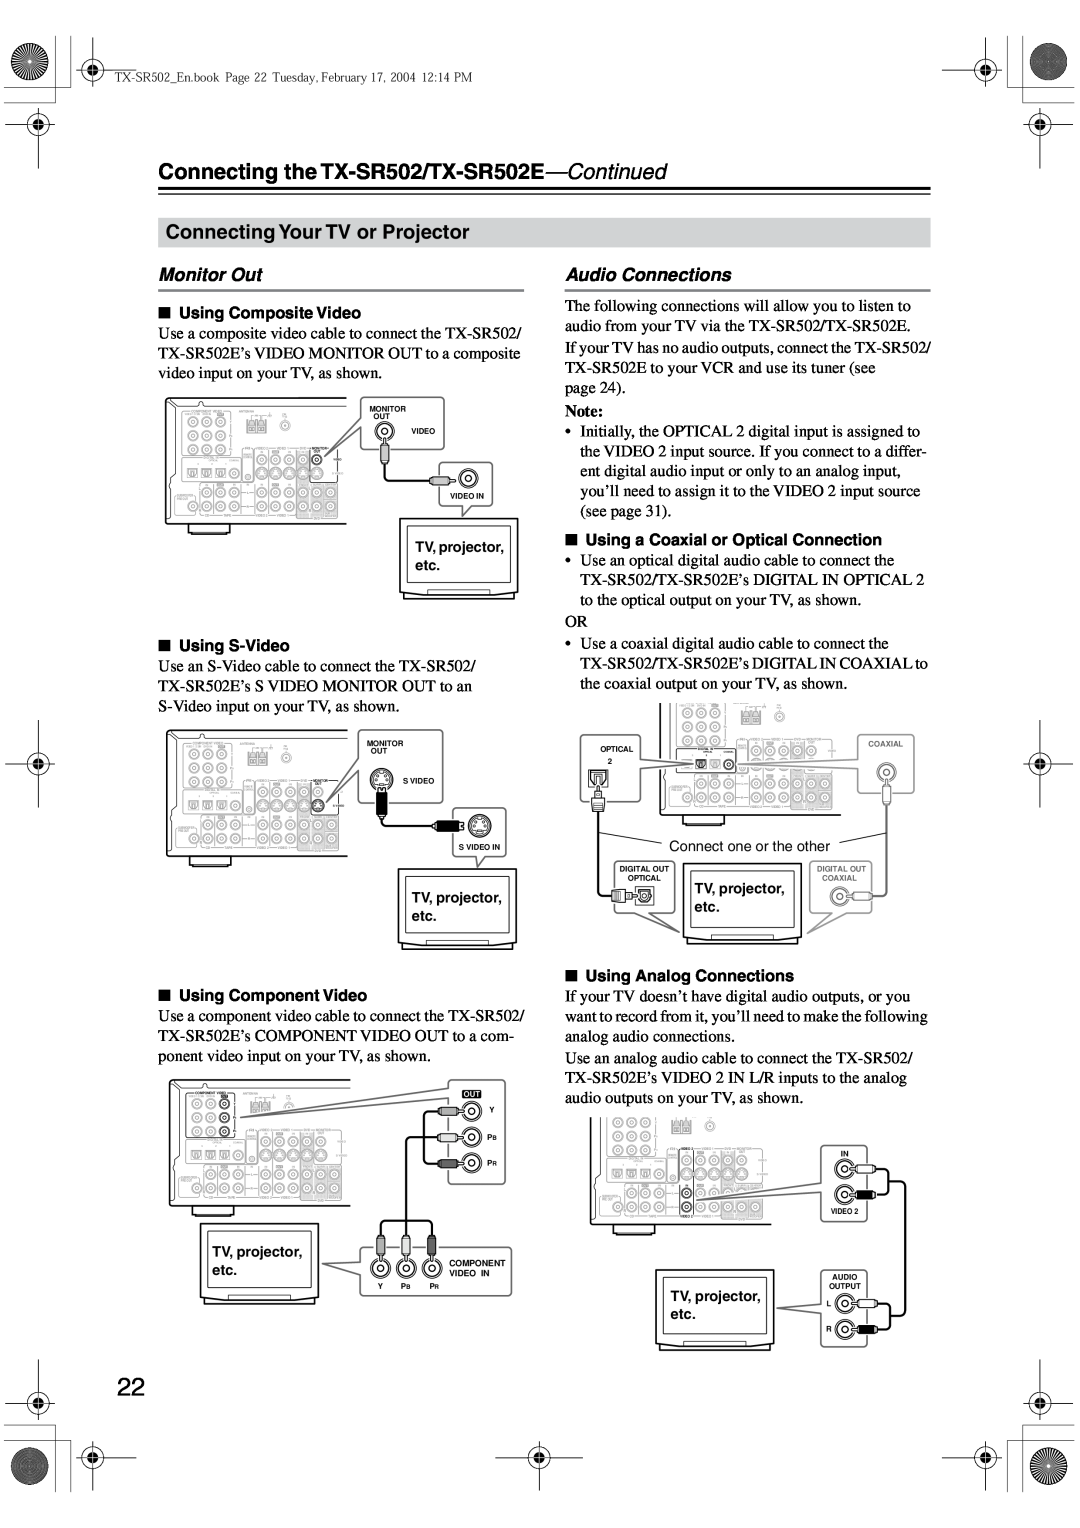 Onkyo TX-SR502E instruction manual Connecting Your TV or Projector, Monitor Out, Audio Connections 